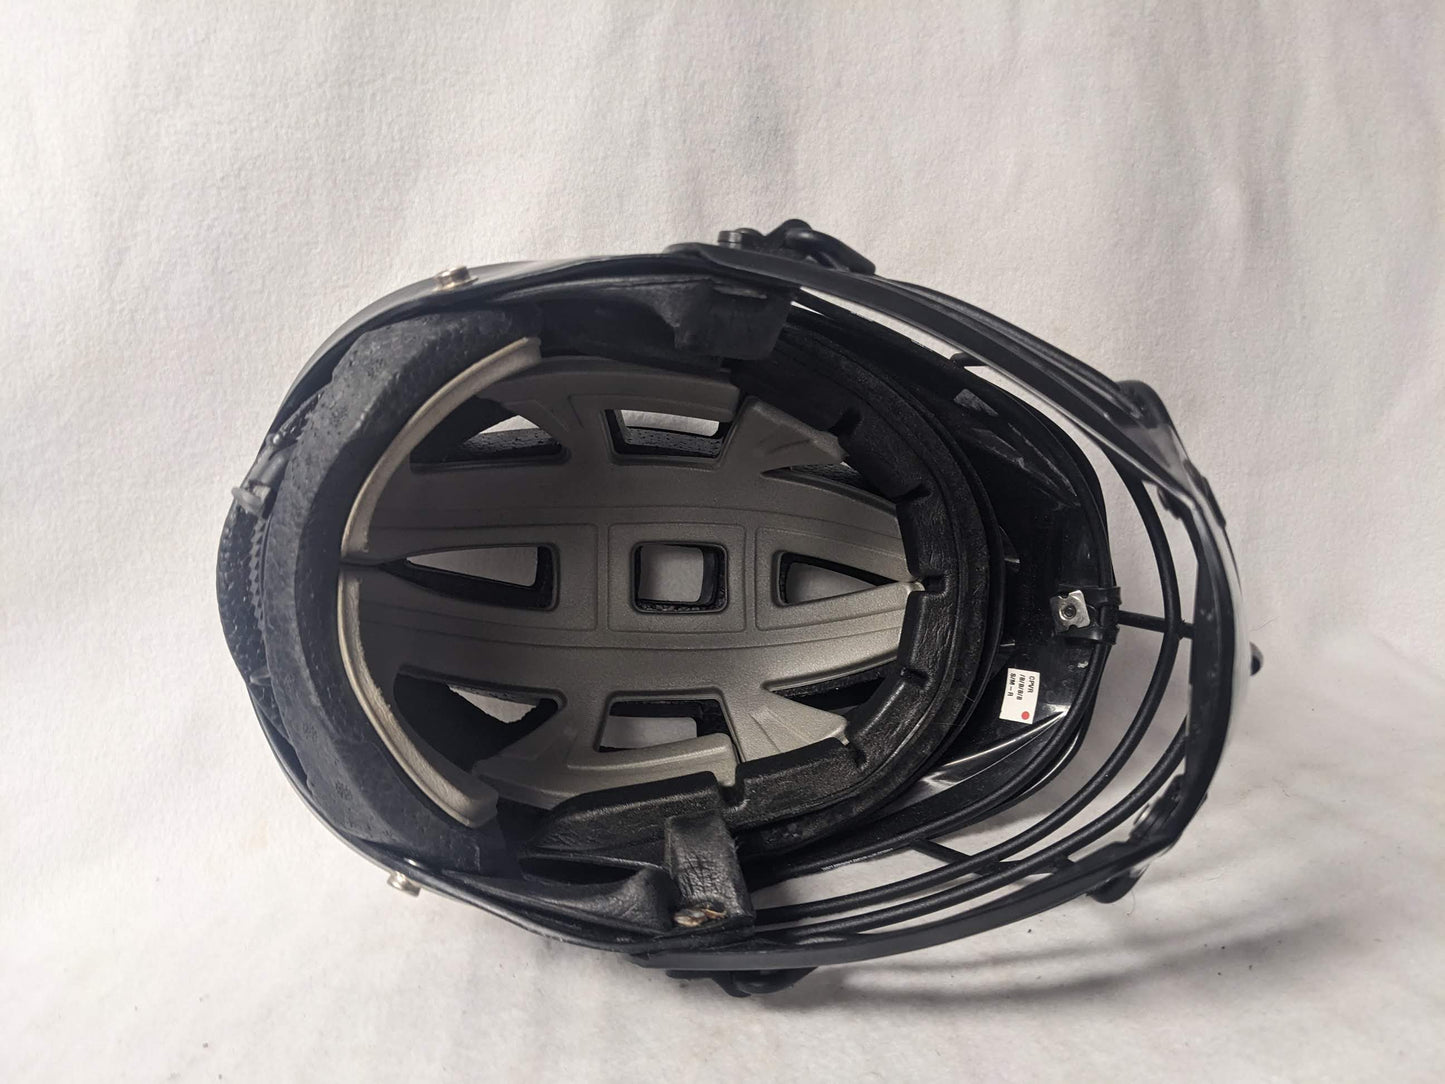 Cascade Youth Lacrosse Helmet Size Youth Medium Color Black Condition Used